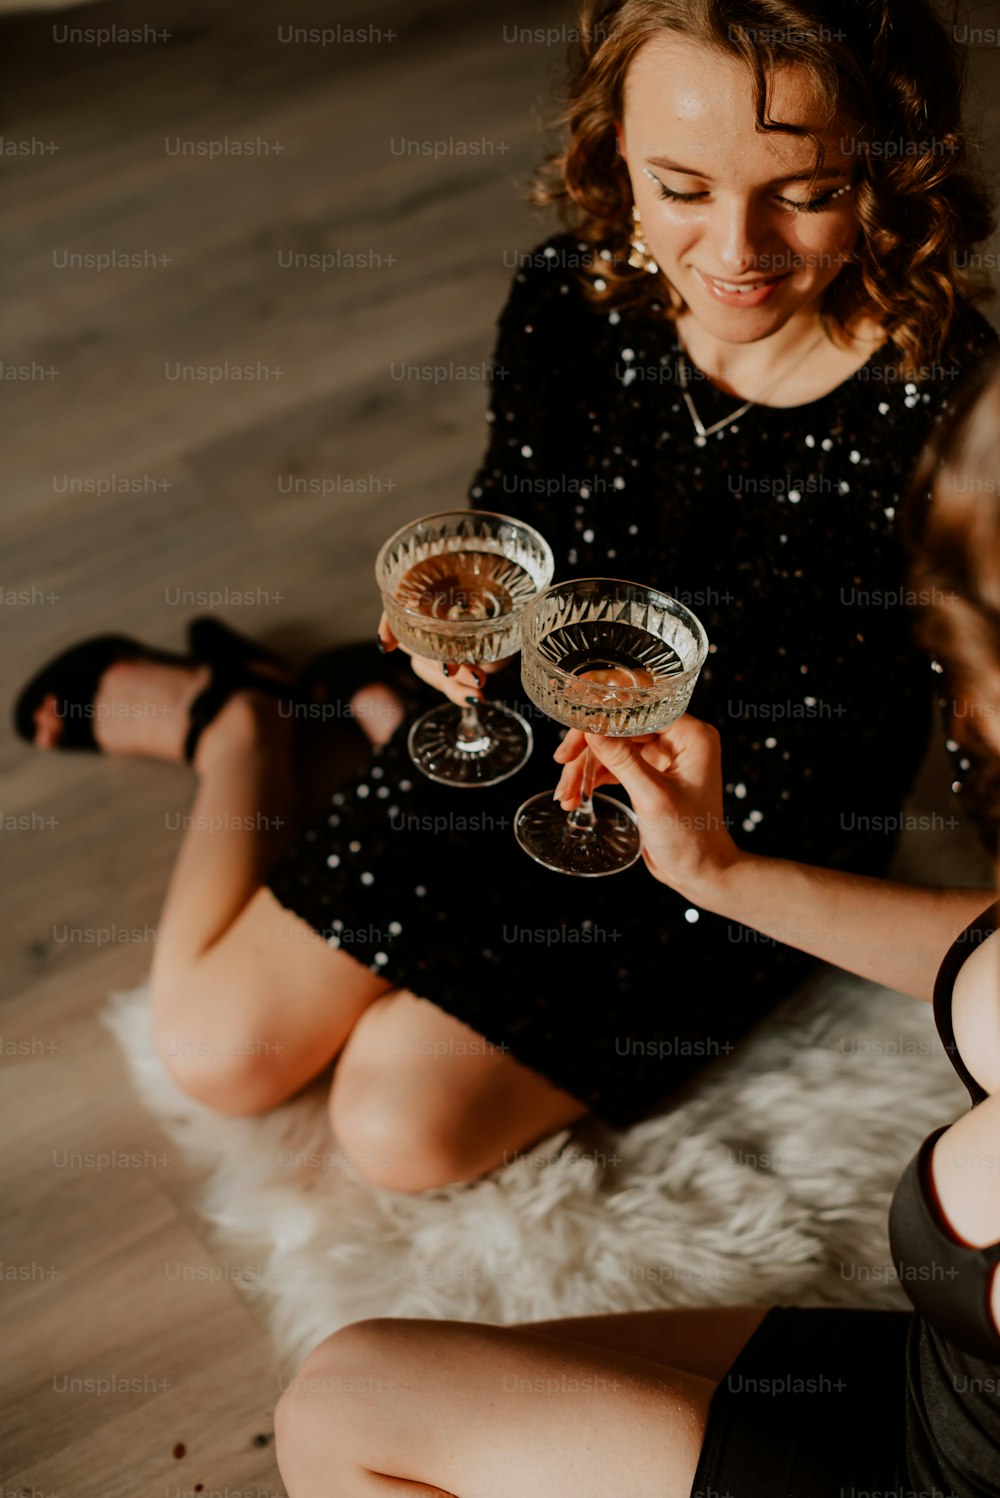 a woman sitting on the floor holding two wine glasses